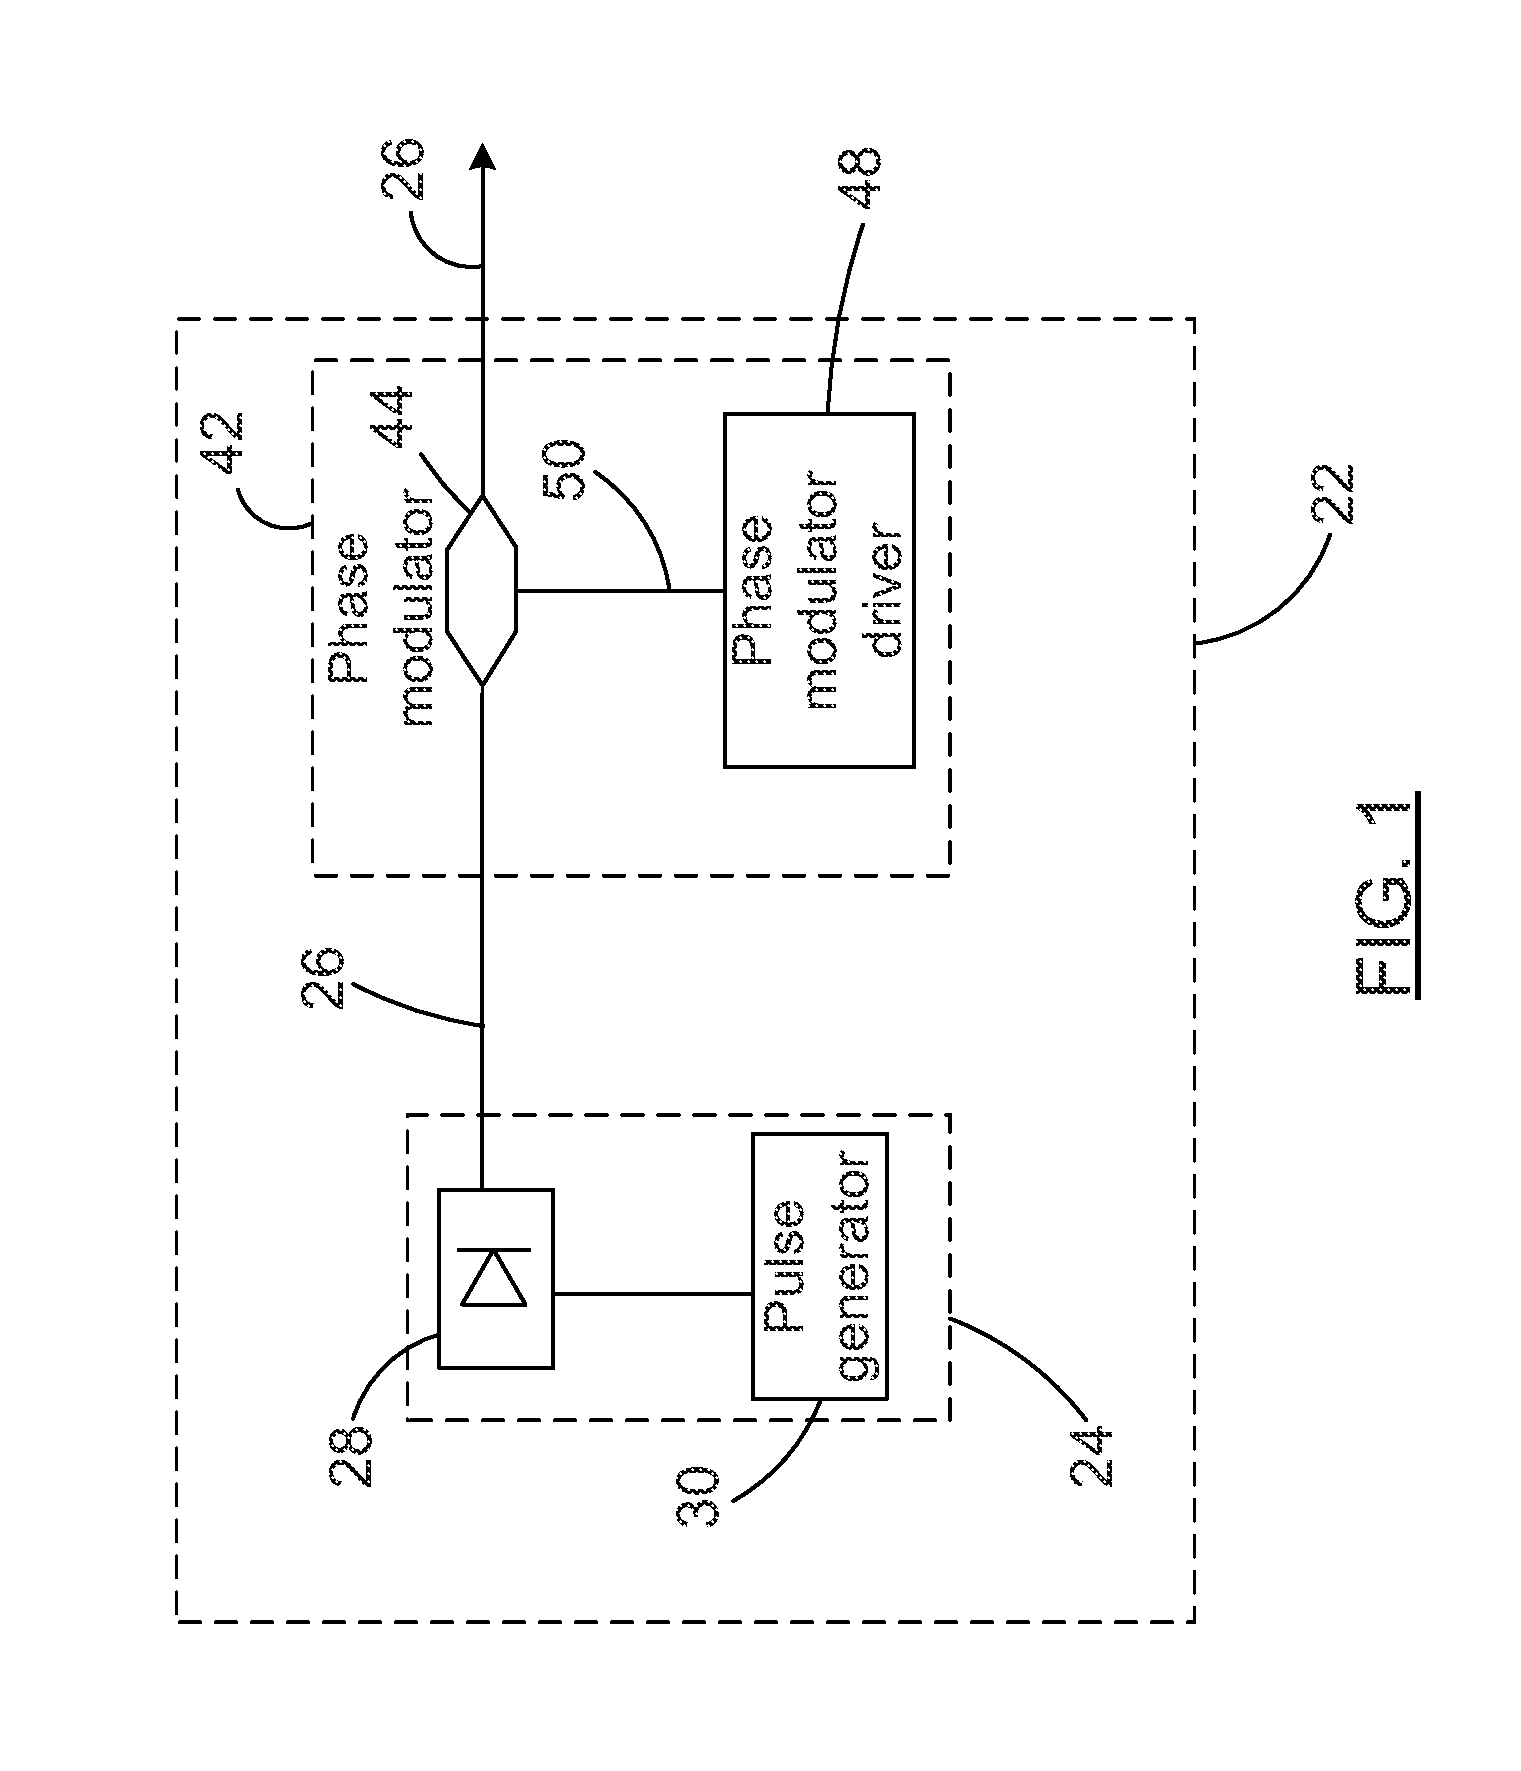 Fiber laser oscillators and systems using an optimized phase varying function